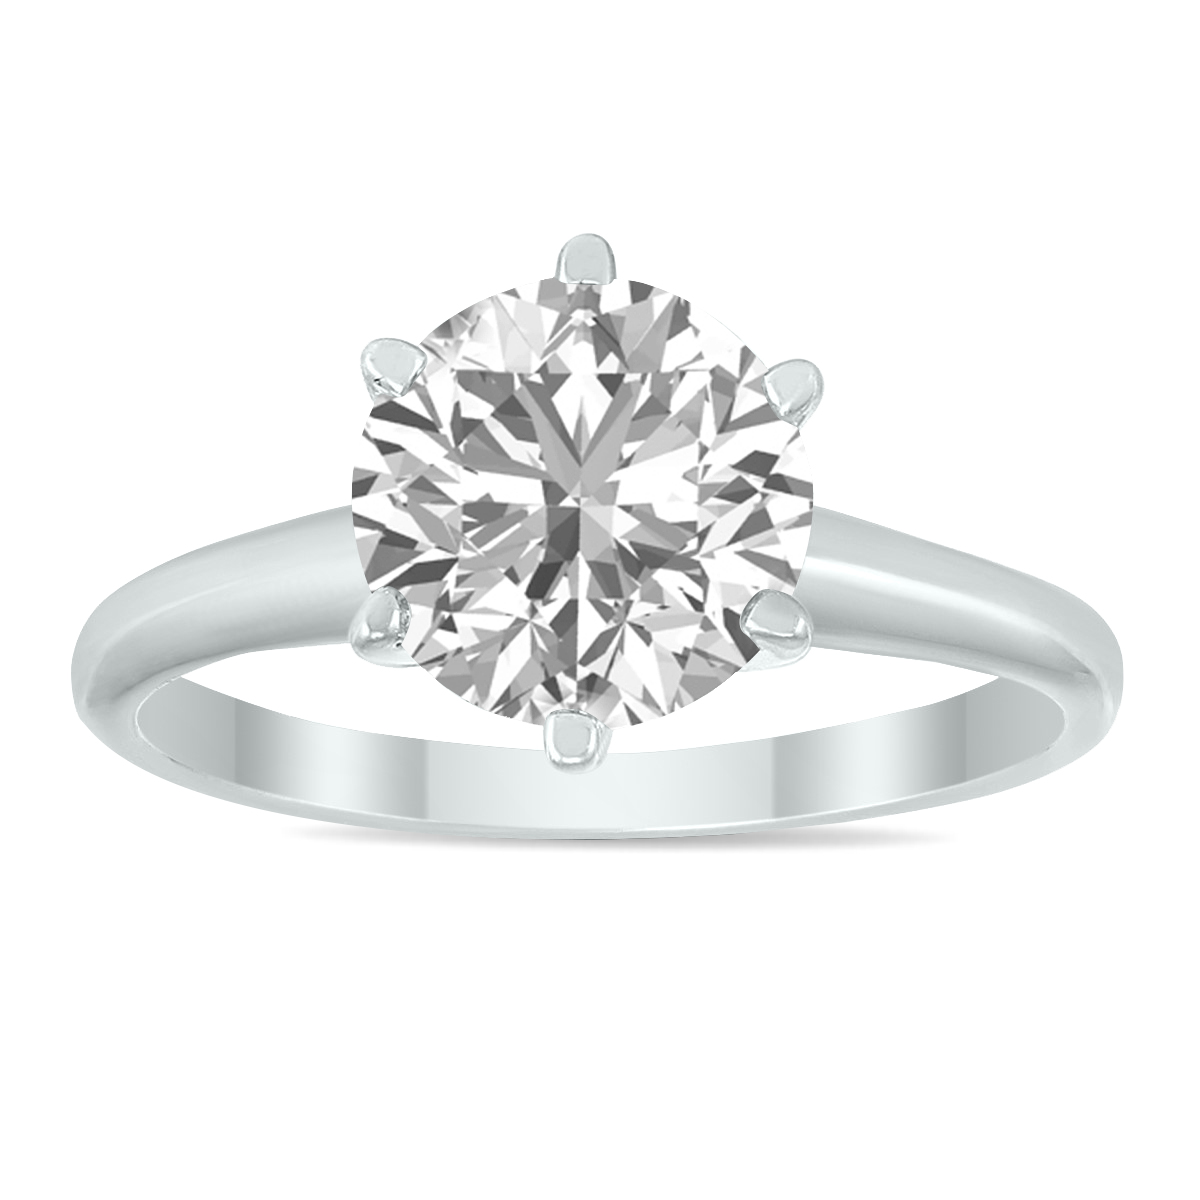 Image of IGI Certified Lab Grown 1 1/4 Carat Diamond Solitaire Ring in 14K White Gold (I Color SI1 Clarity)